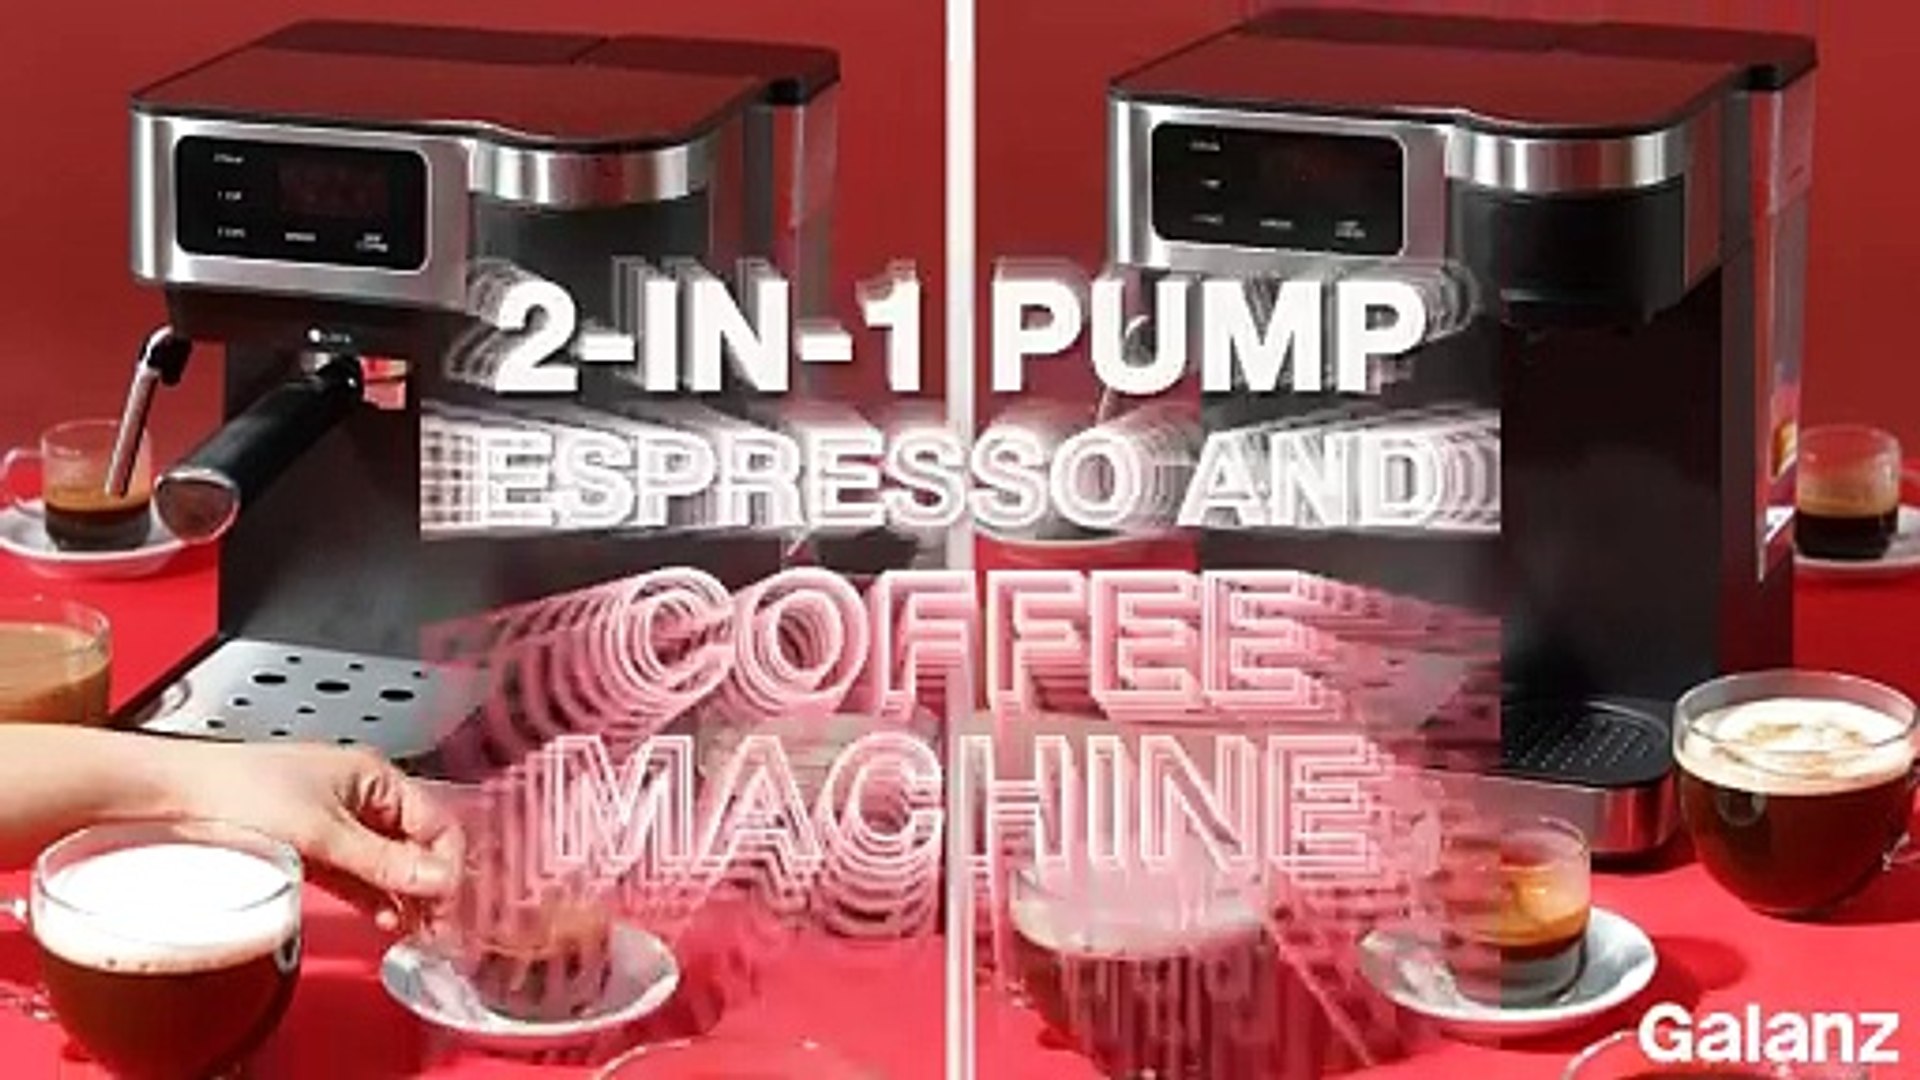 Galanz Espresso Machine with Frother & Reviews